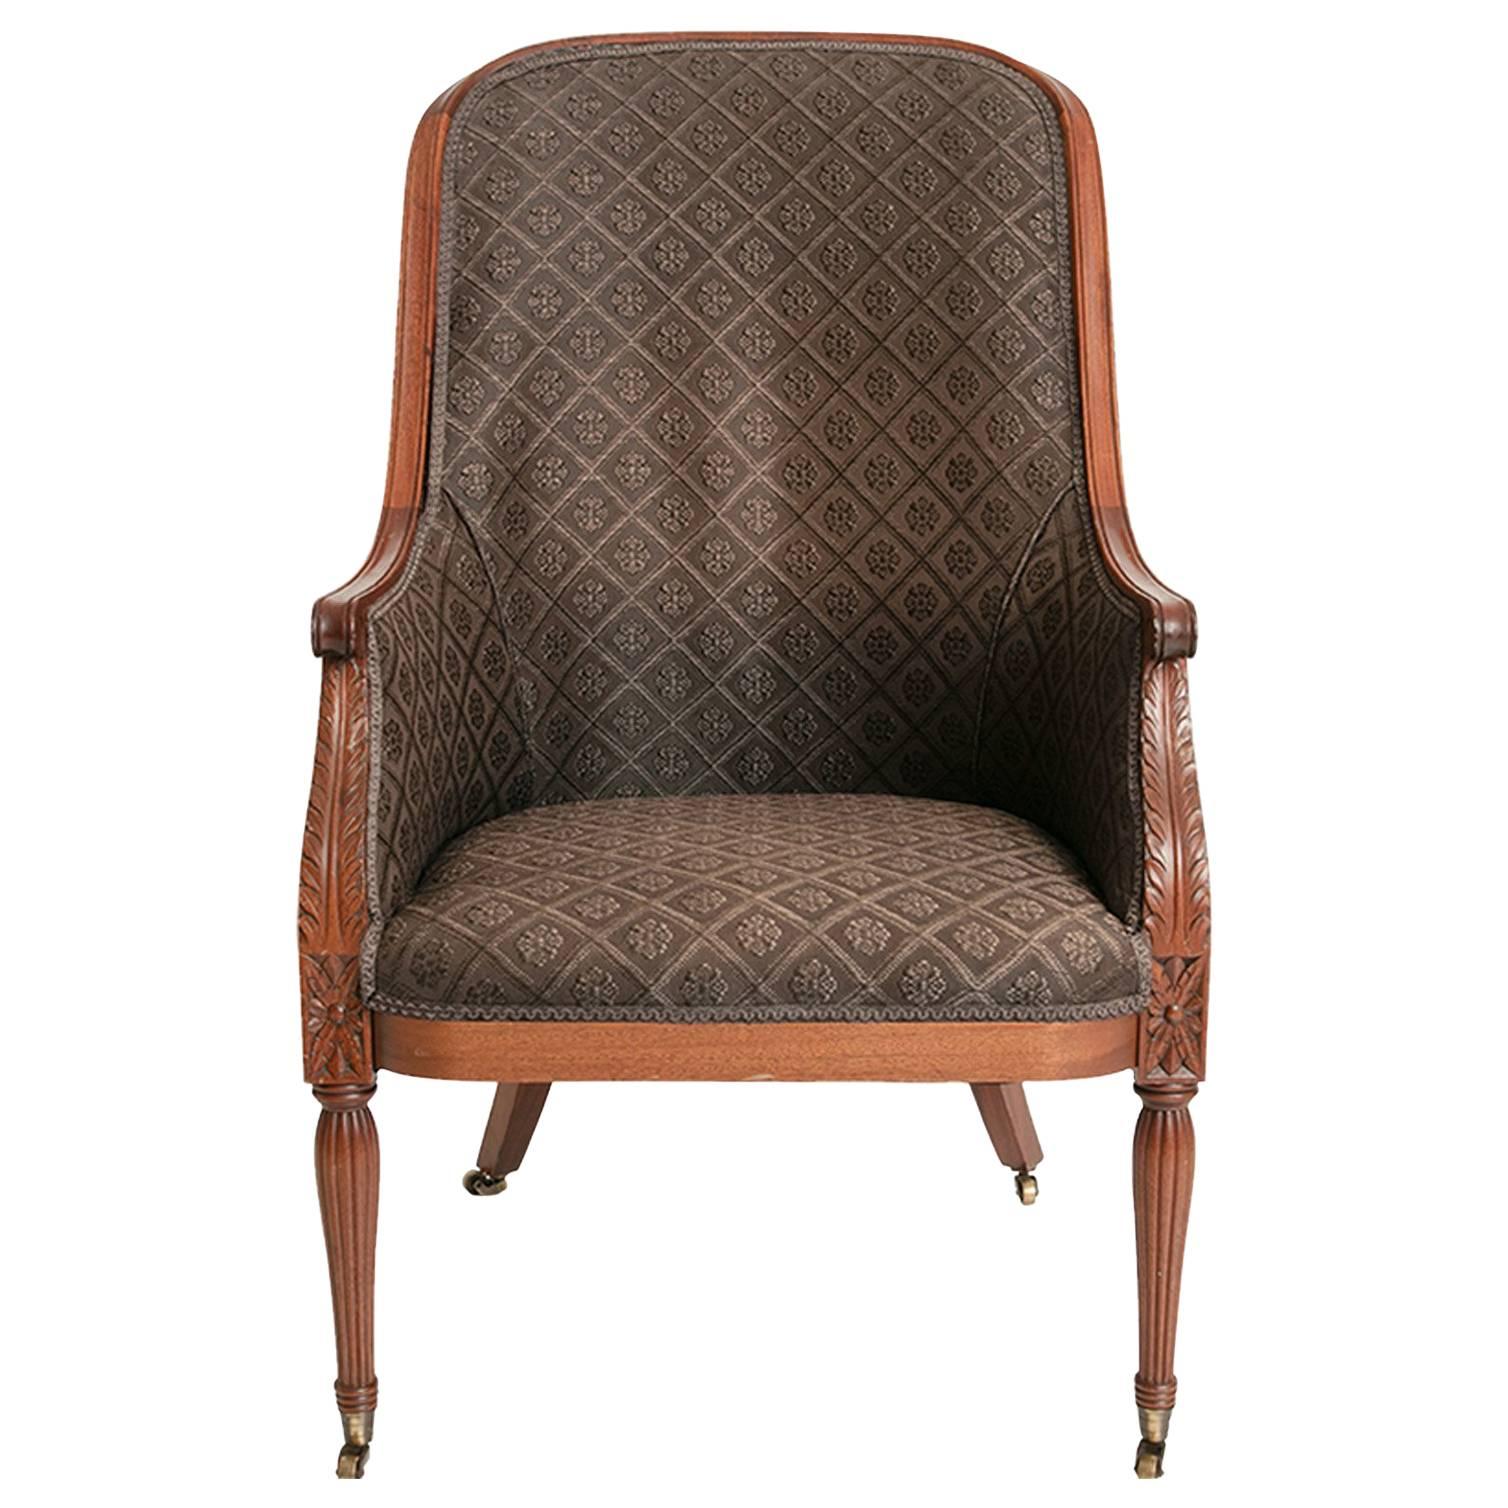 Louis XVI Chairs Upholstered in Horsehair